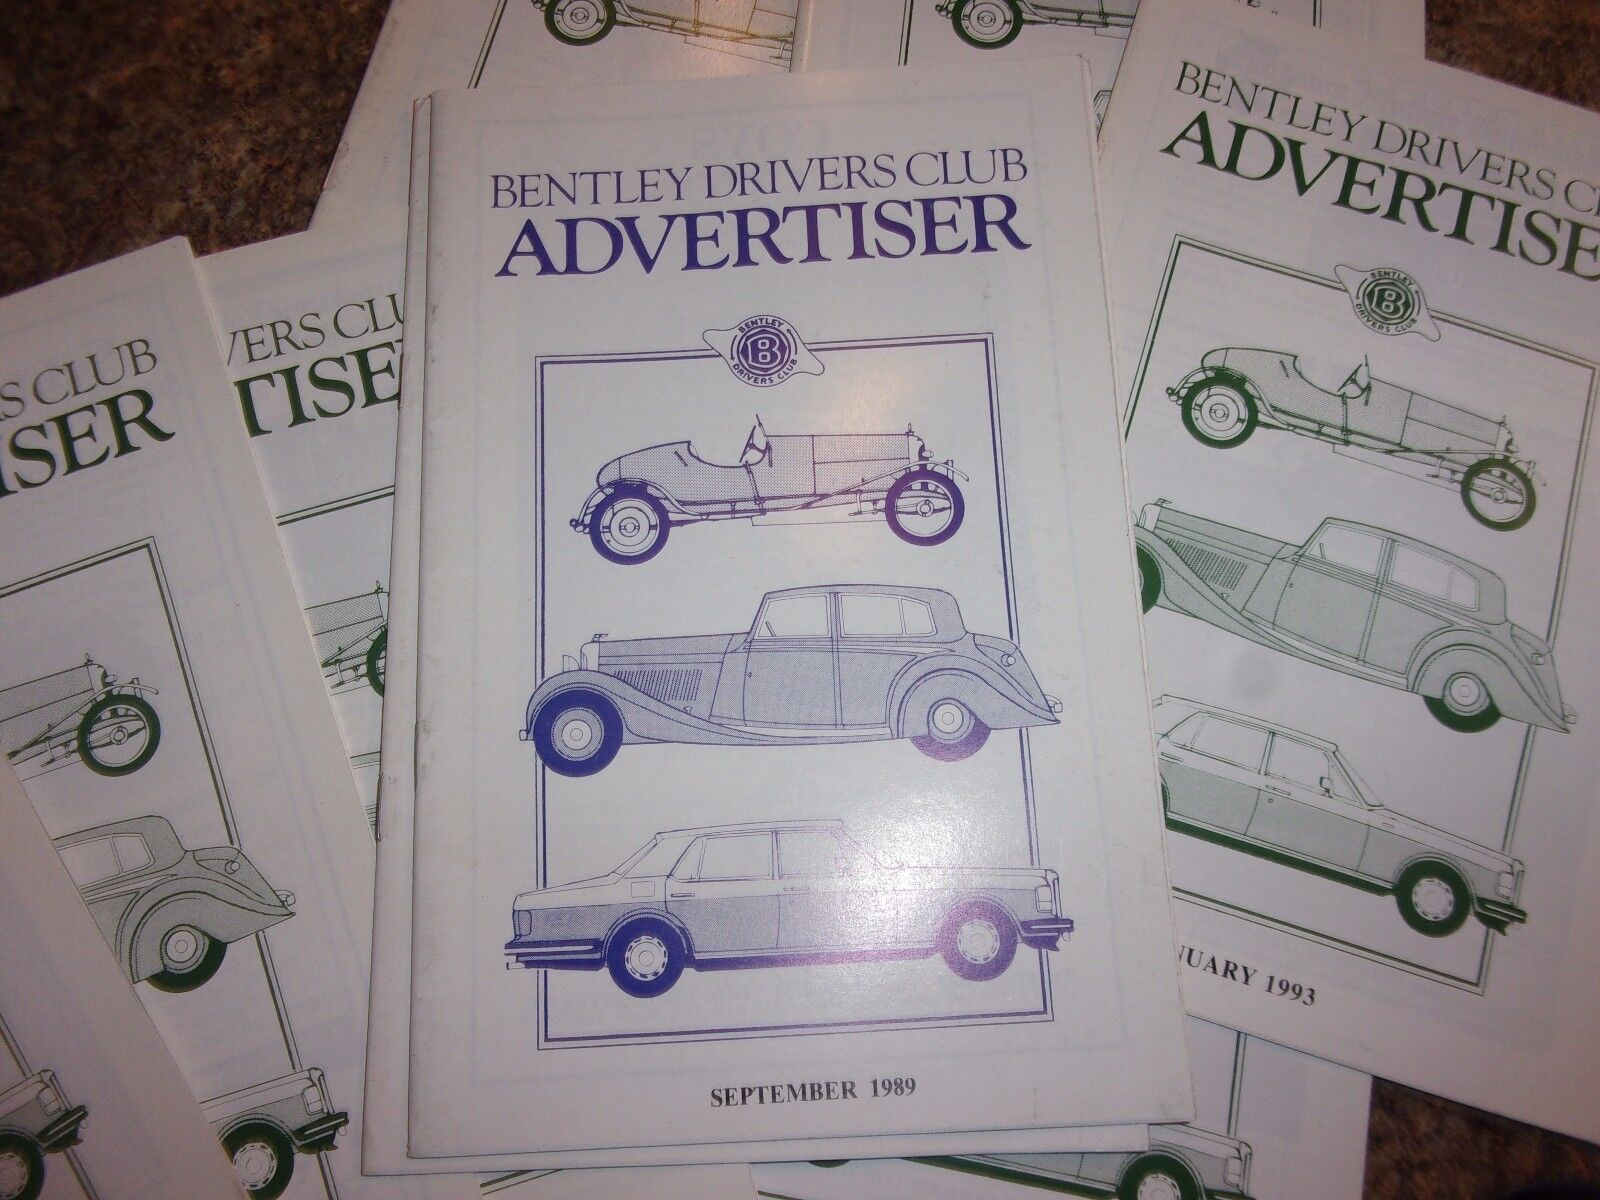 The Bentley Drivers Club Advertiser 10 issues - 1989 1991 1992 1993 1994 - LOTL